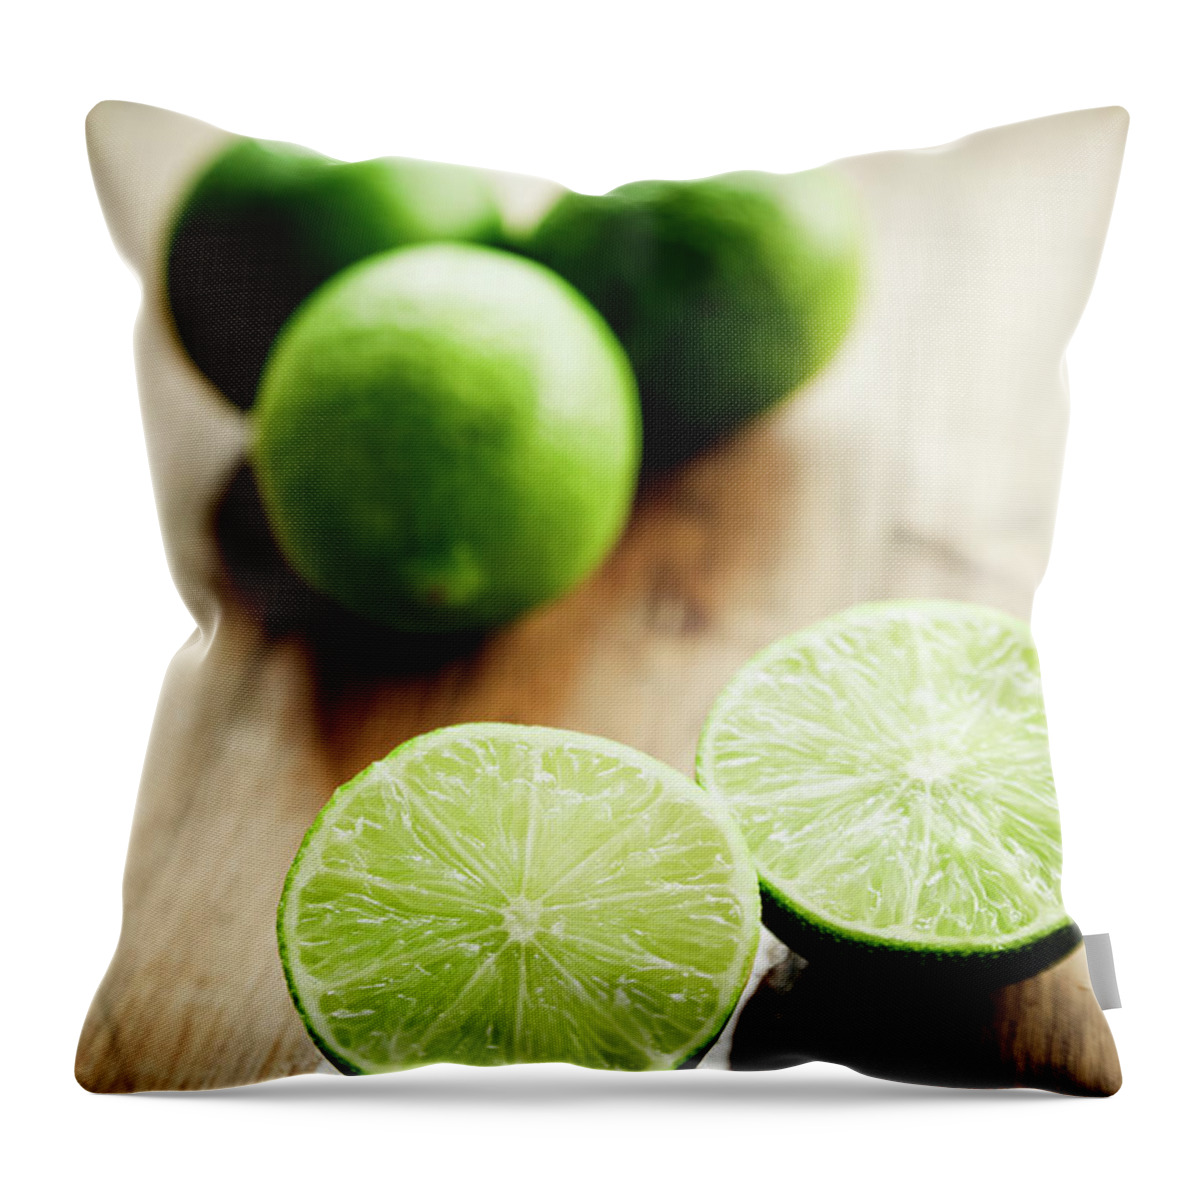 Vitamin C Throw Pillow featuring the photograph Group Of Lines On A Wooden Table by Mmeemil